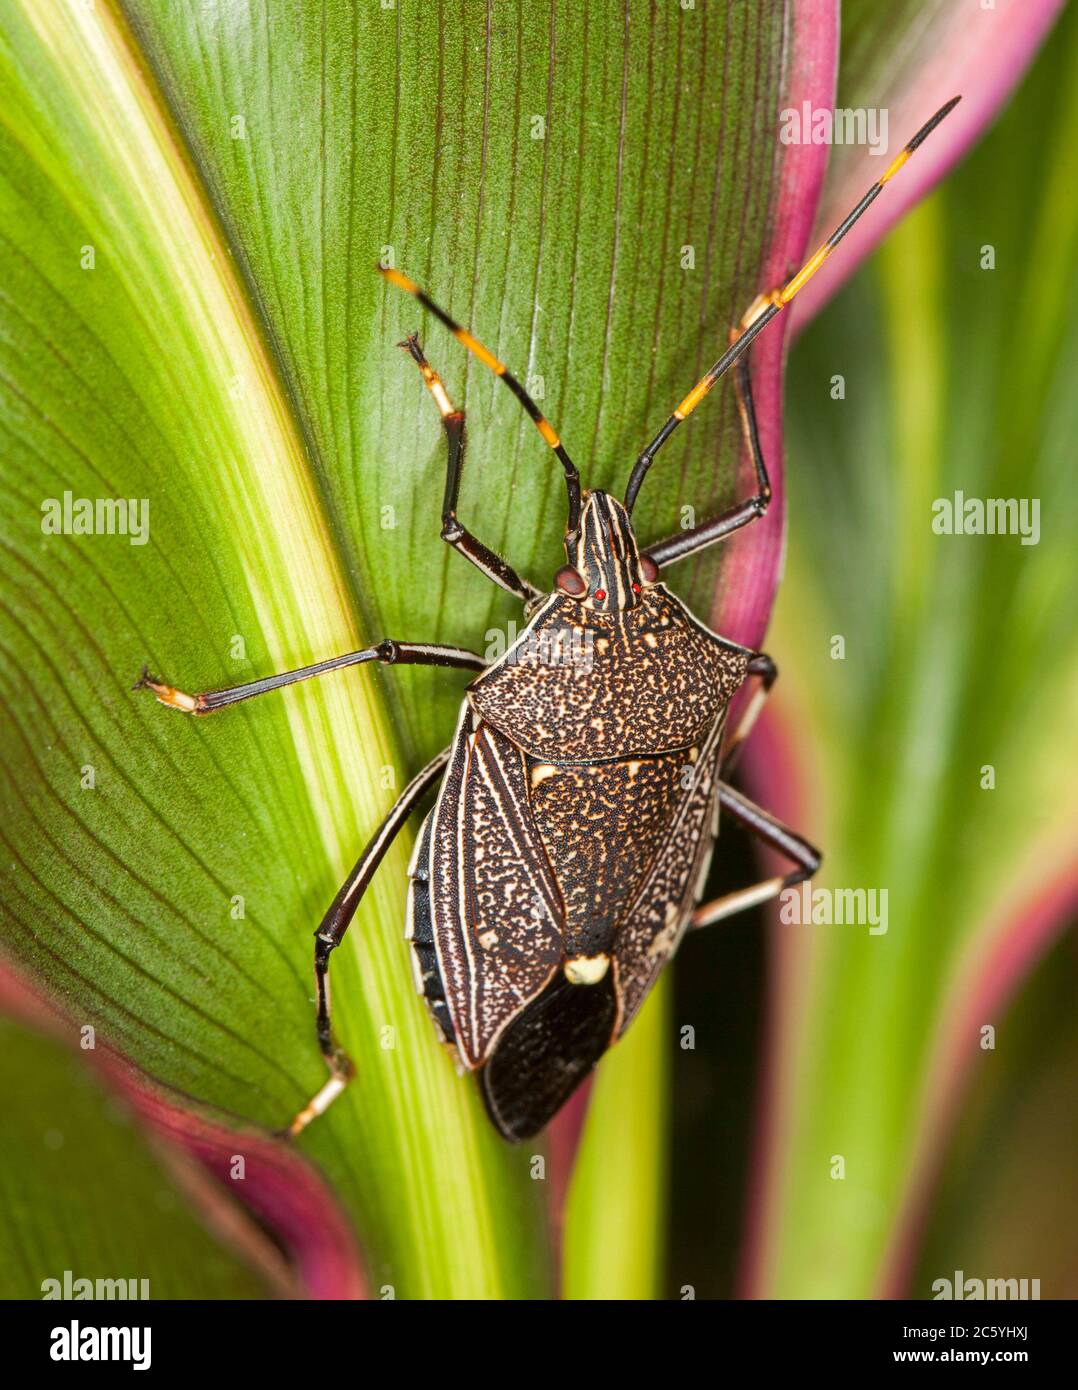 Gum tree shield bug, Poecilometis species, with large eyes and long antennae on colourful green and red cordyline leaf in an Australian garden Stock Photo